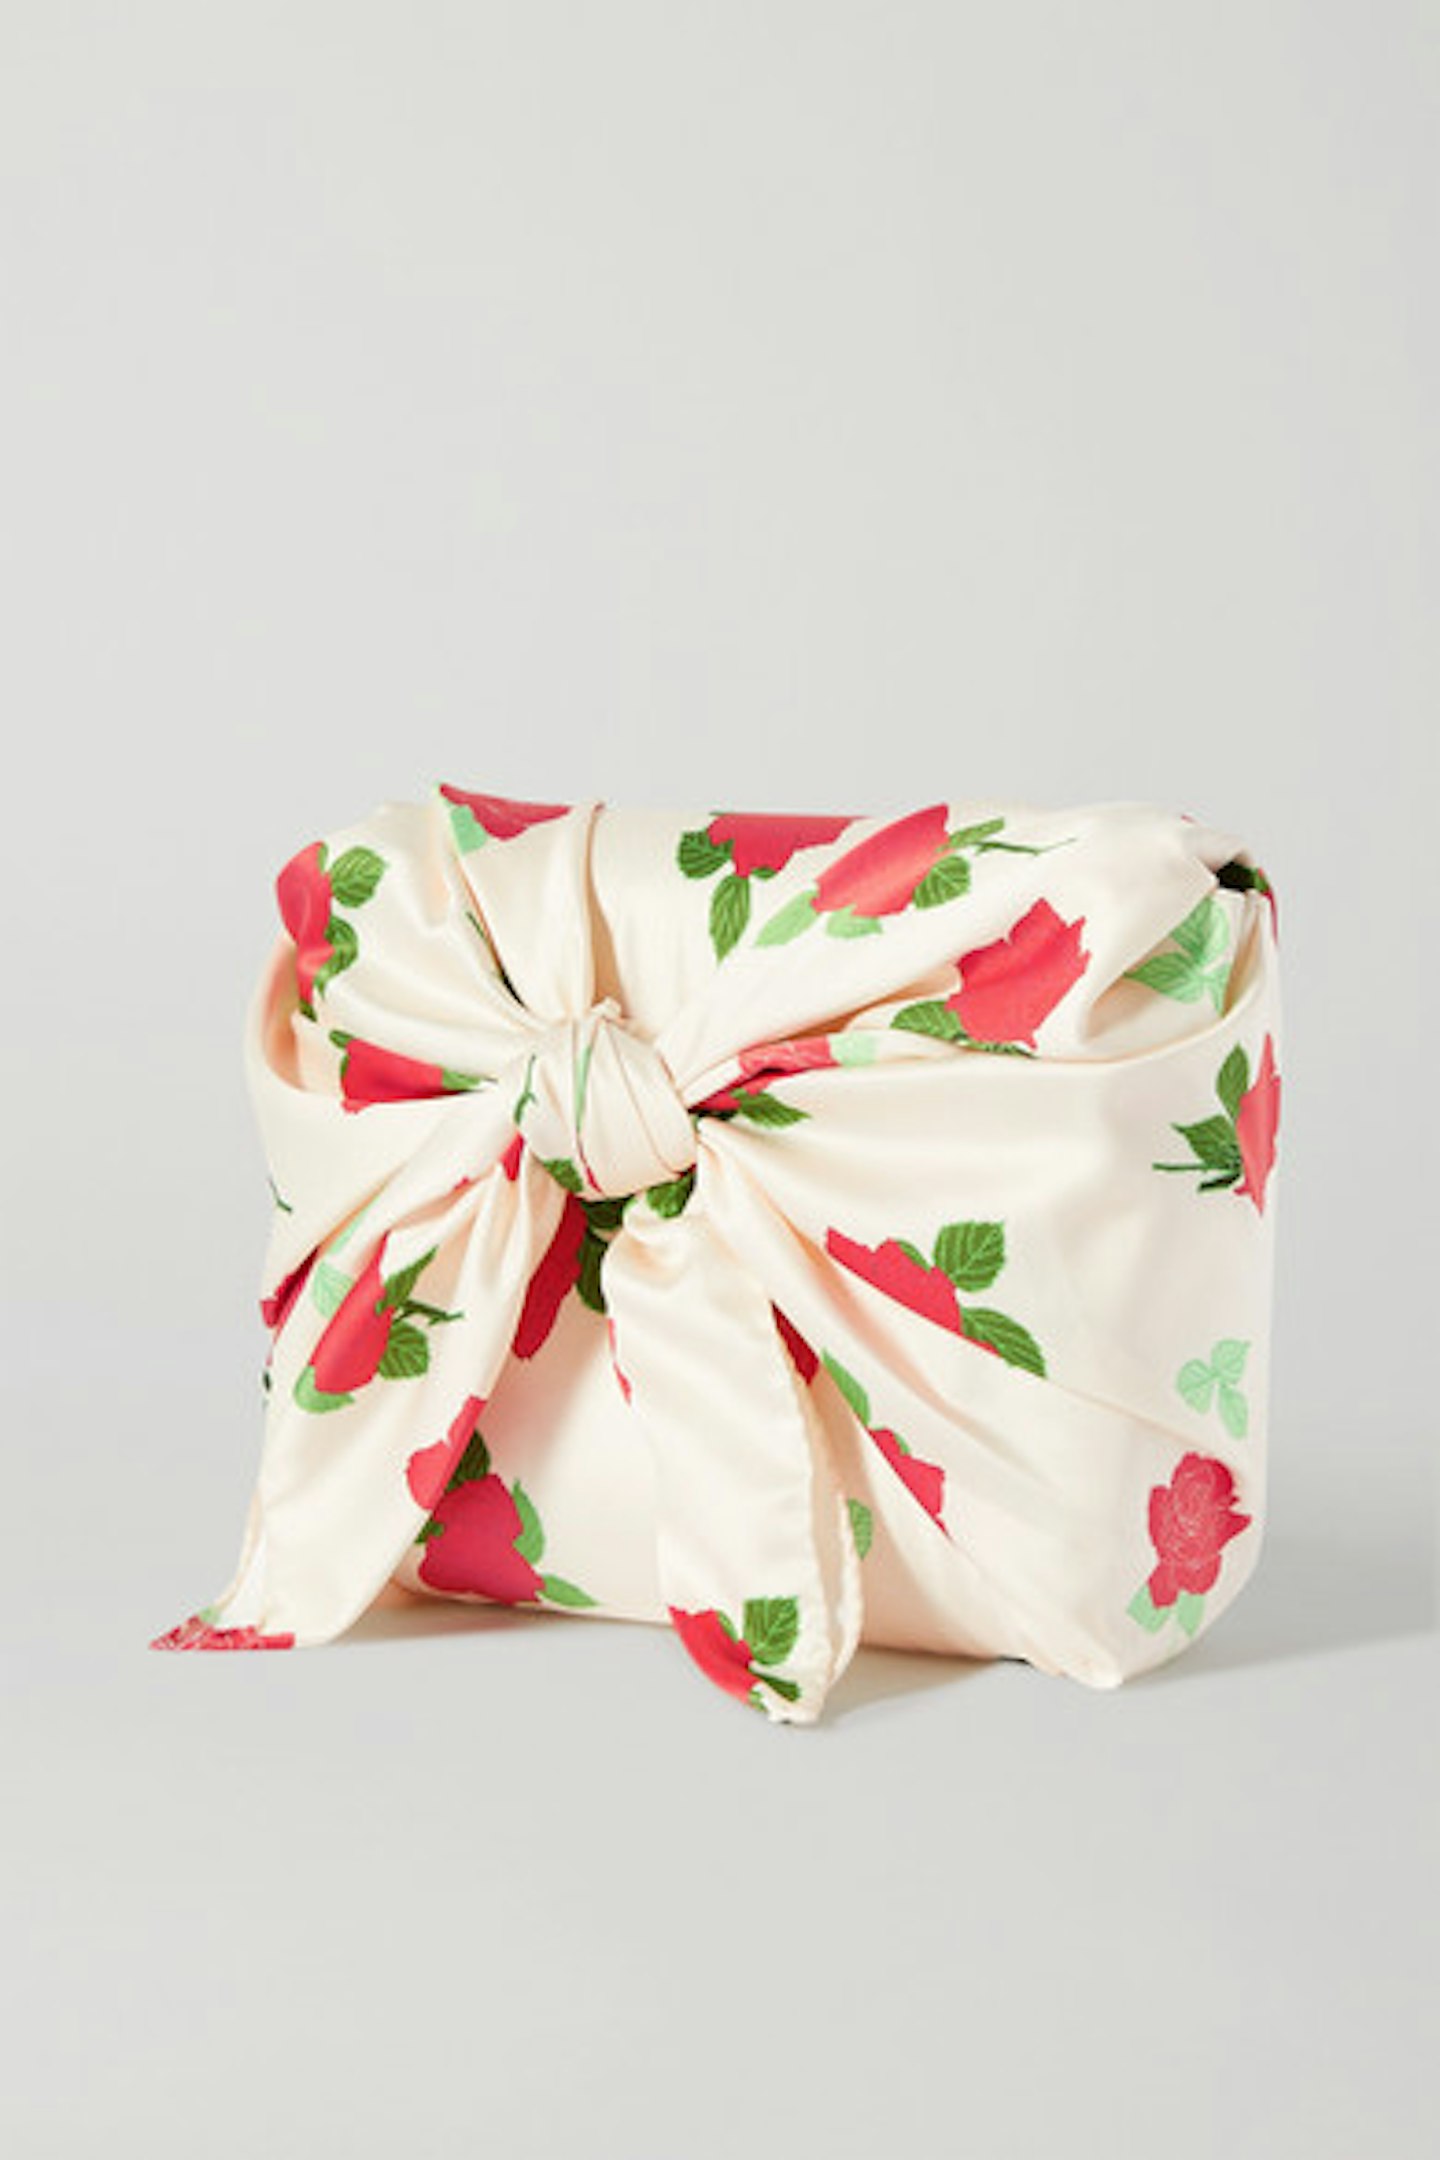 Belinda White Knotted Floral-Print Satin Clutch, £450